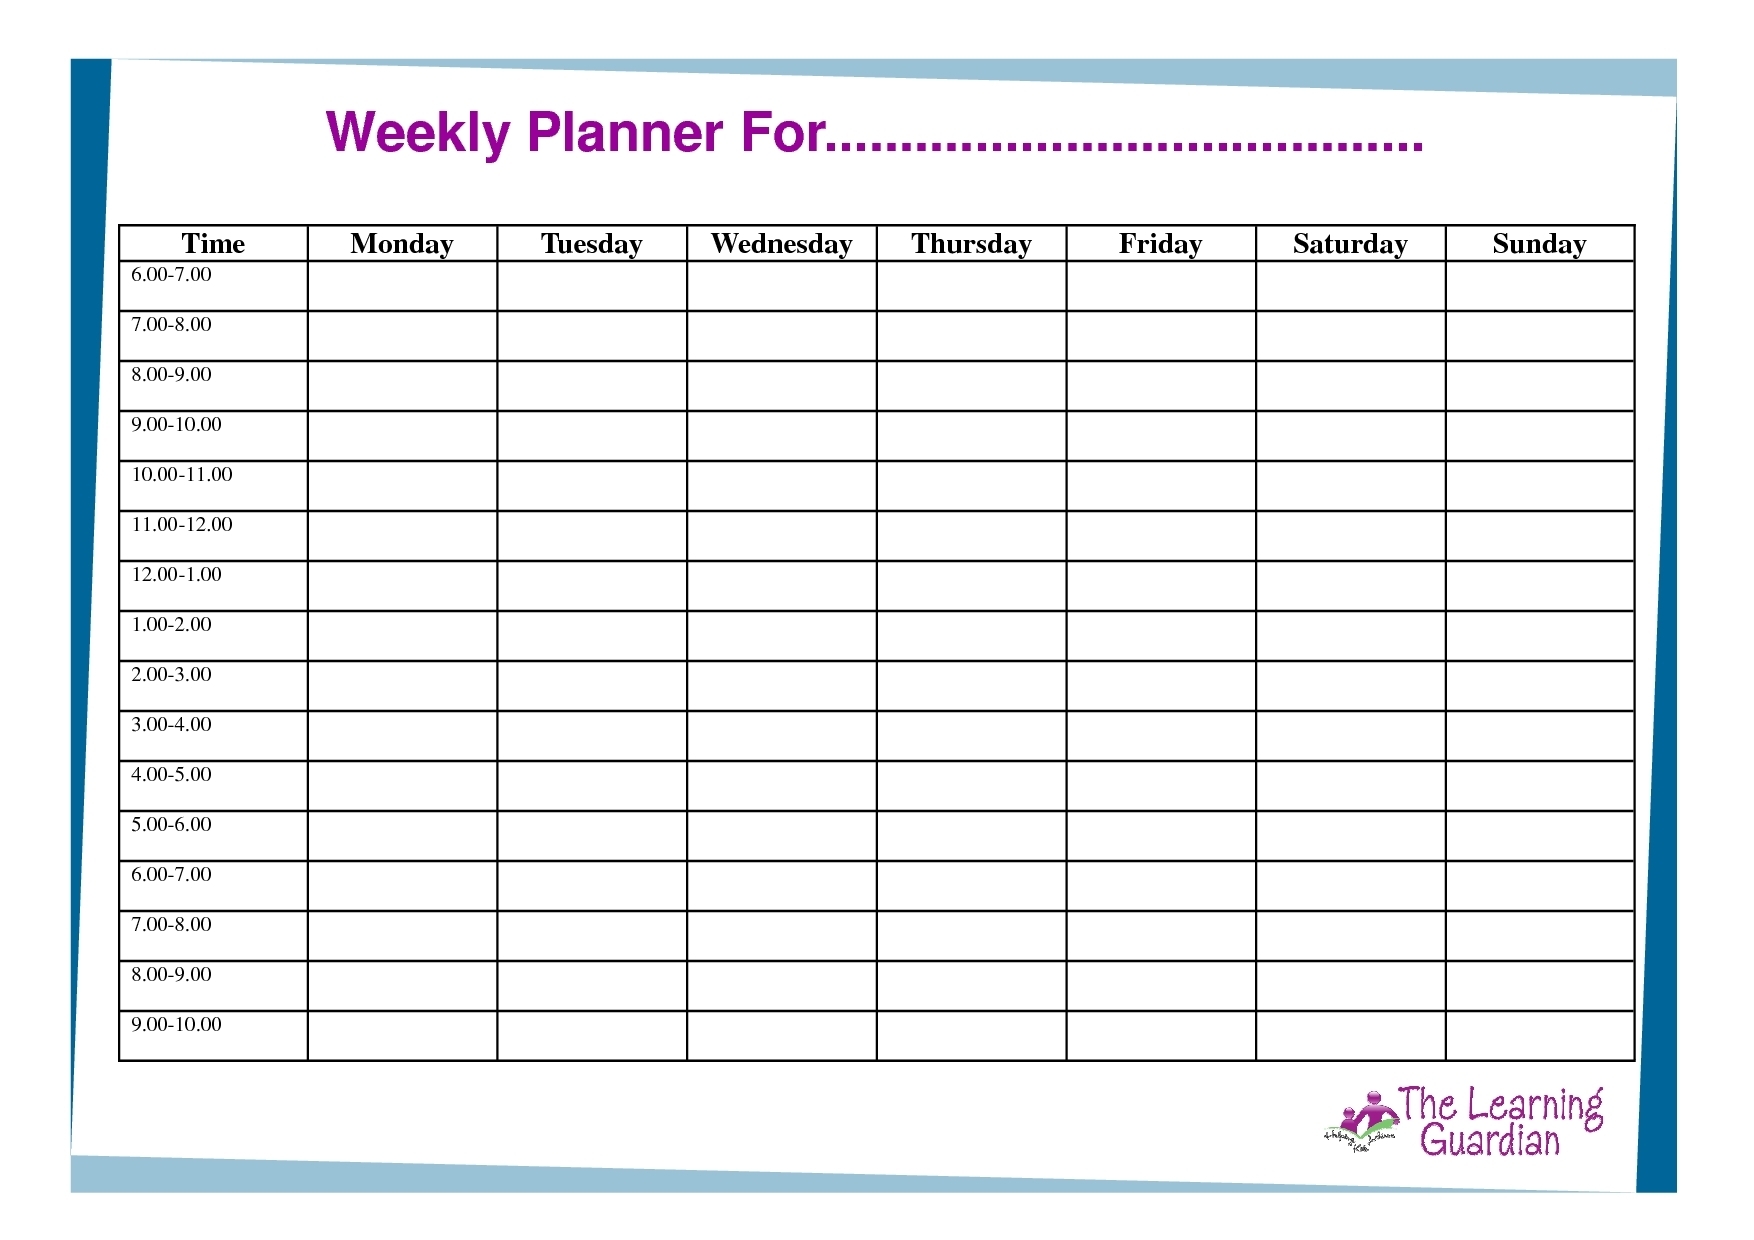 Seven Day Schedule Template | Smorad intended for 7 Day Employee Schedule Template